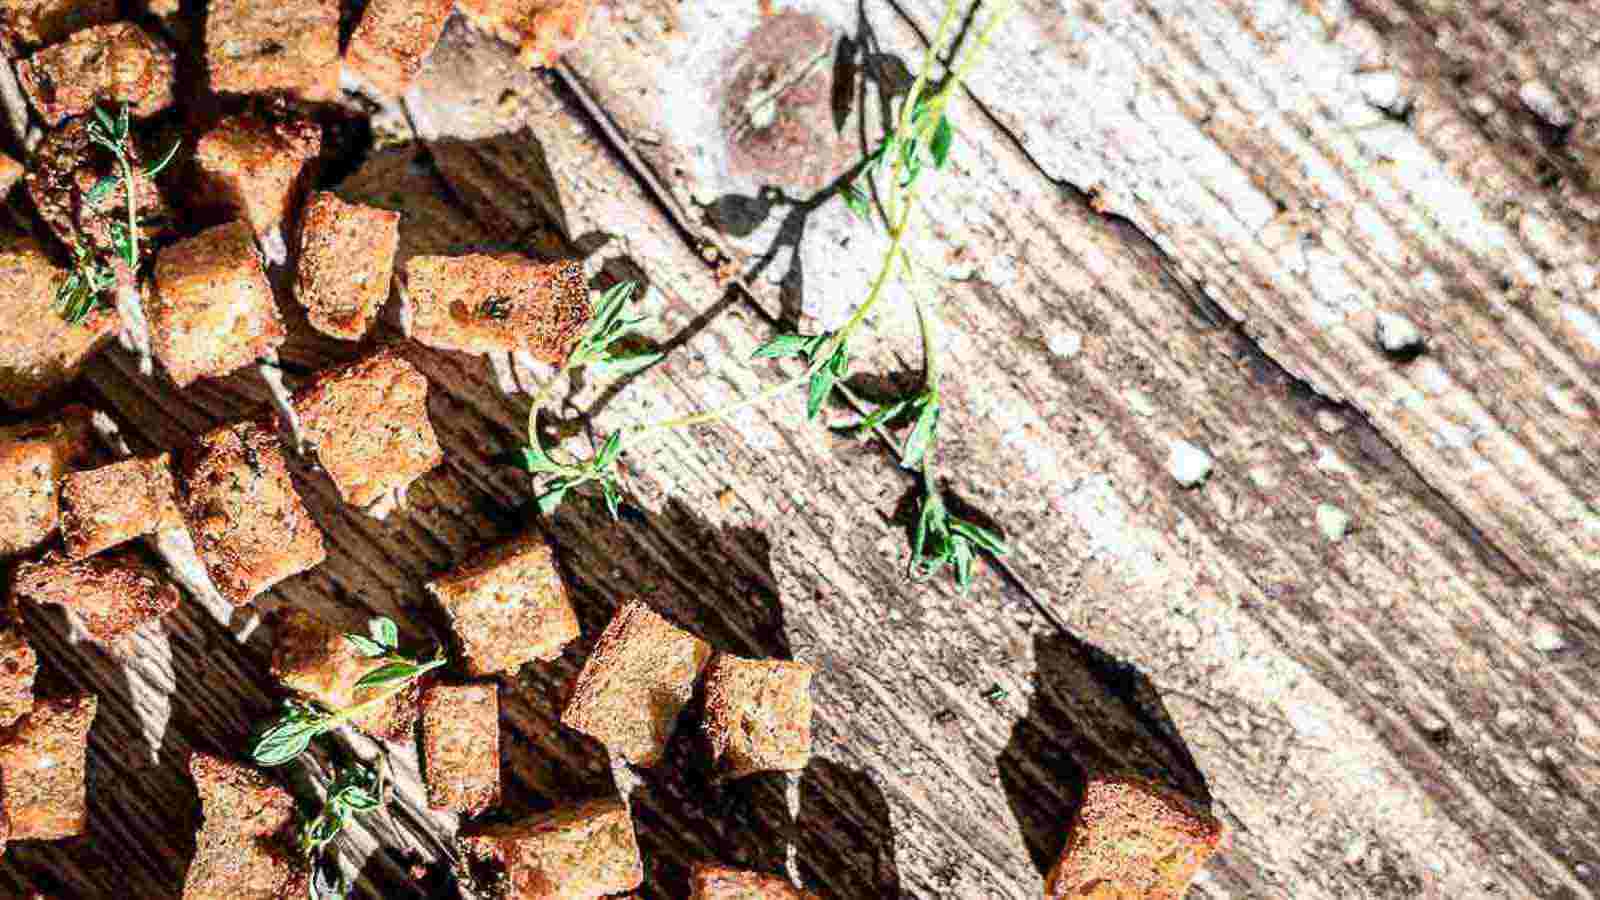 Croutons on a wooden table with sprigs of thyme.